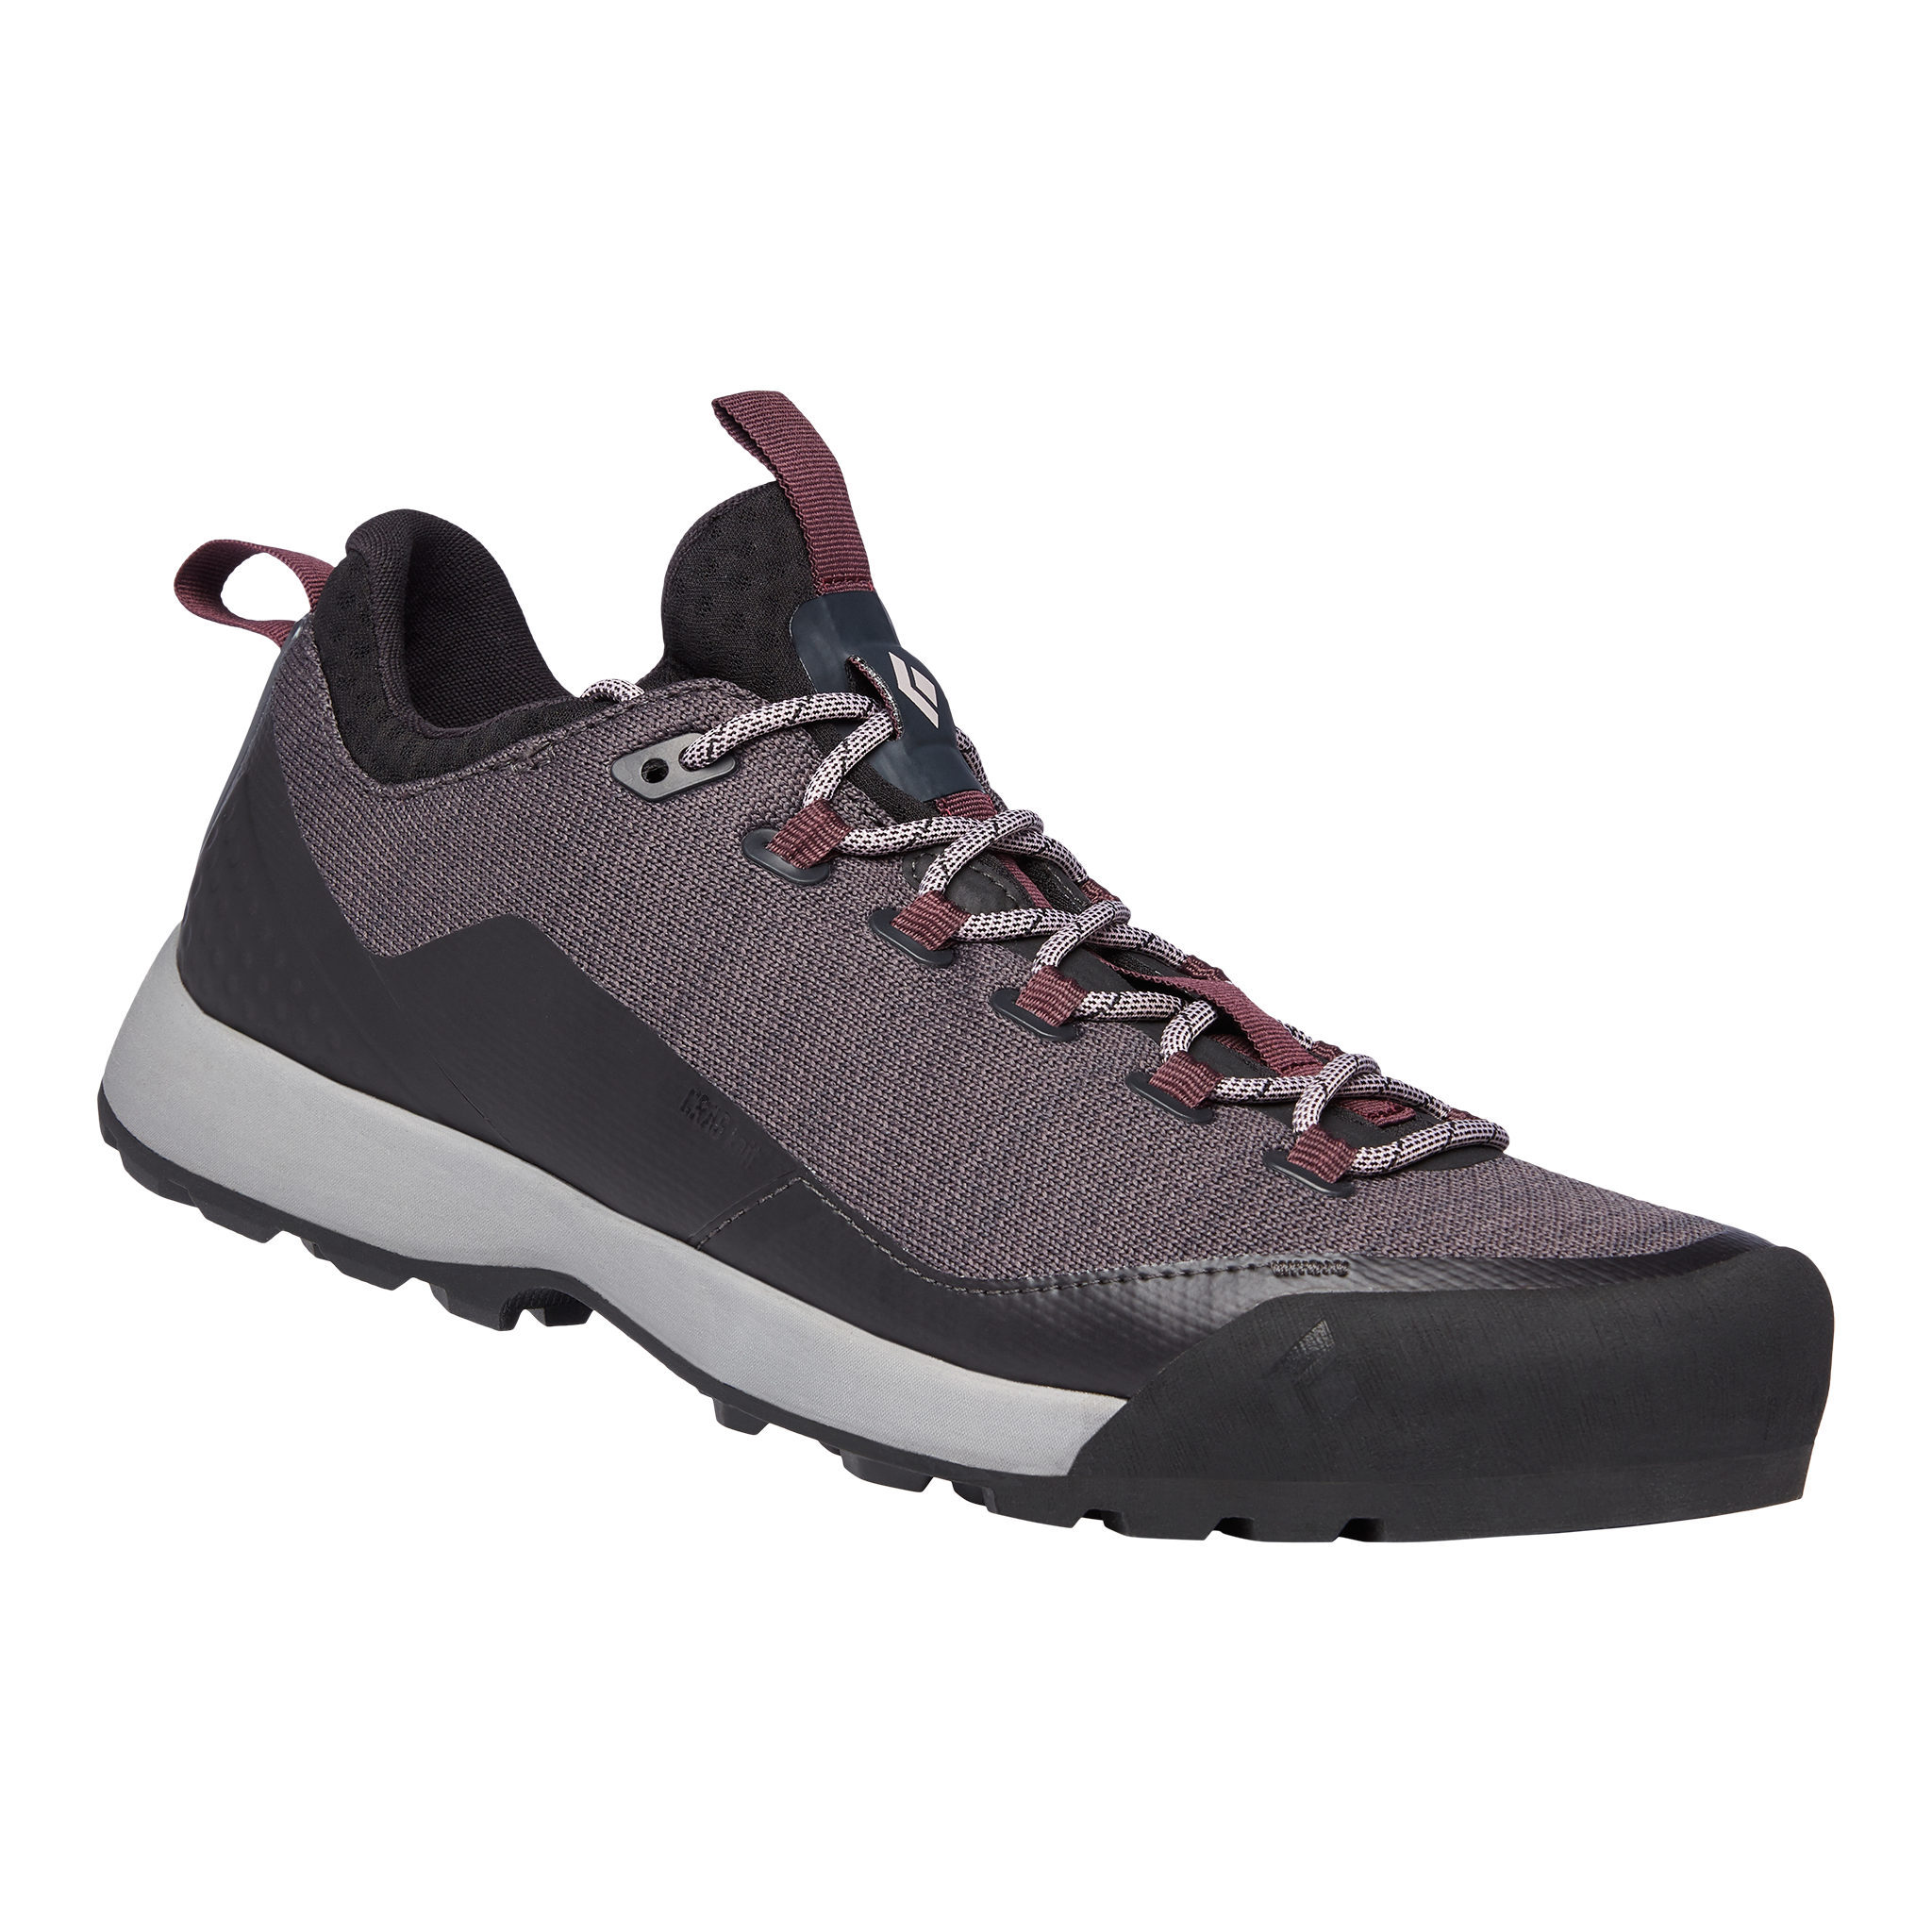 Black Diamond Equipment Women's Mission LT Approach Shoes USW 7 Anthracite/Wisteria